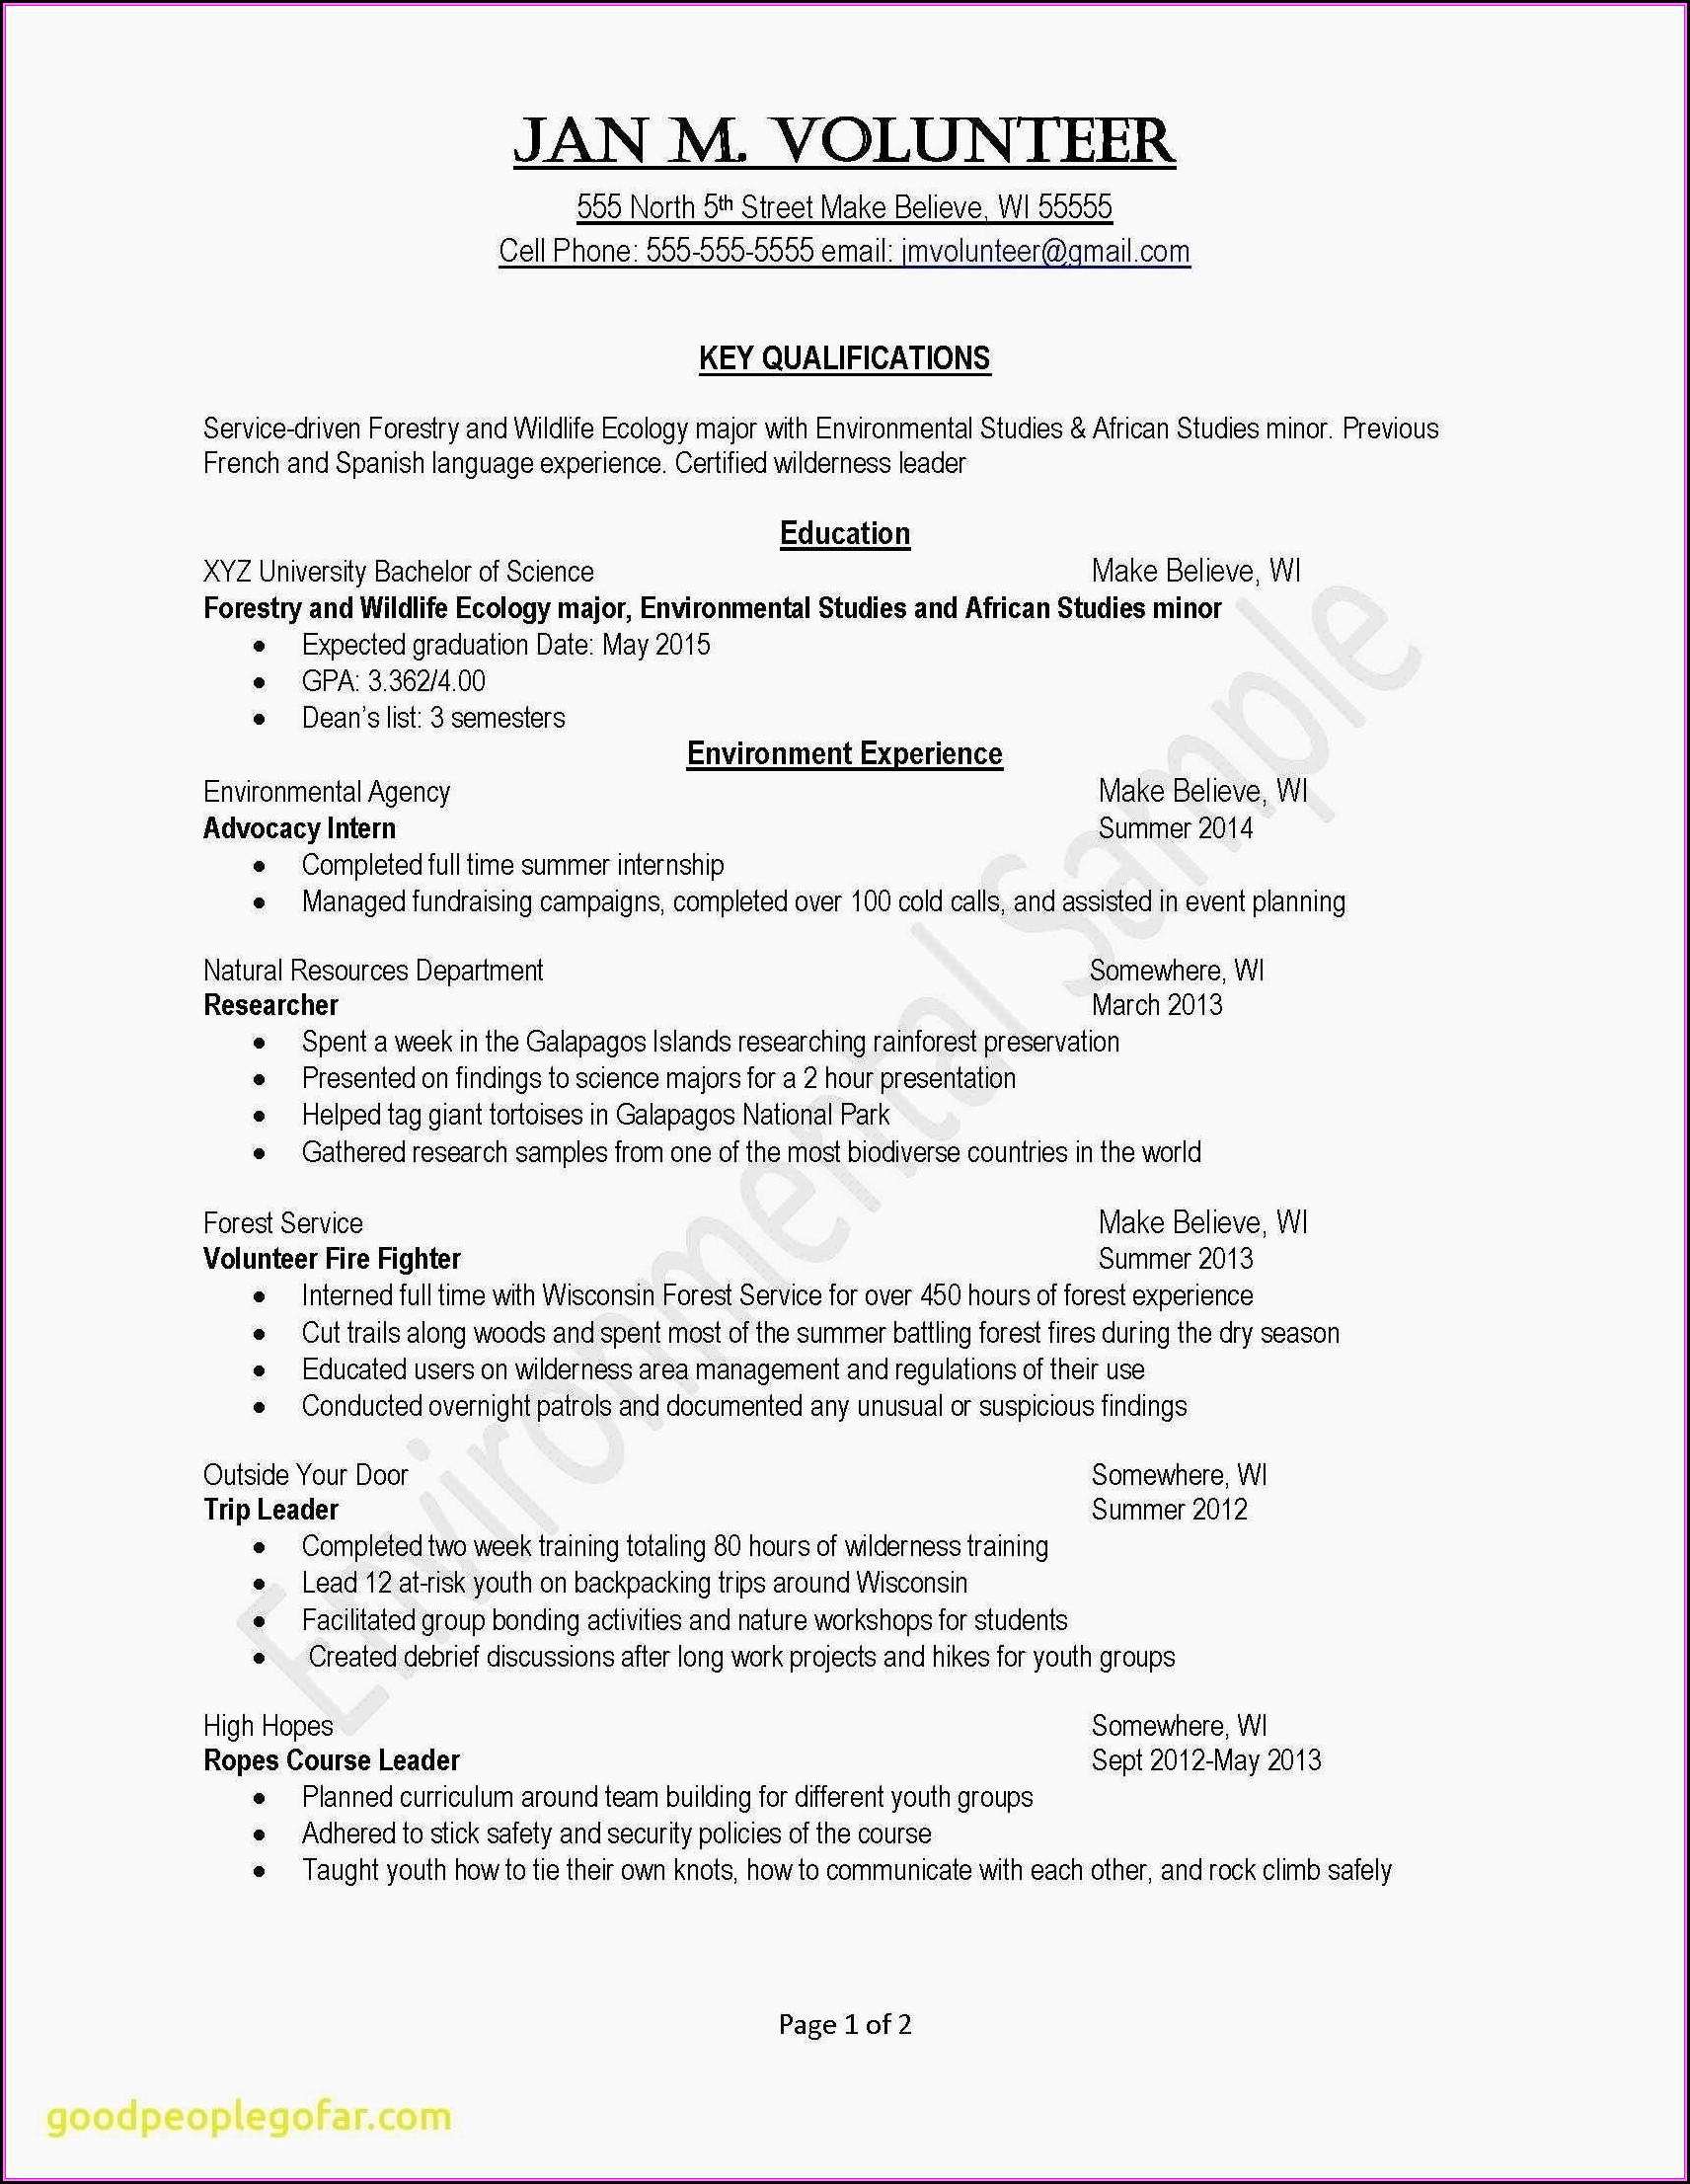 Resume Builder For Stay At Home Mom